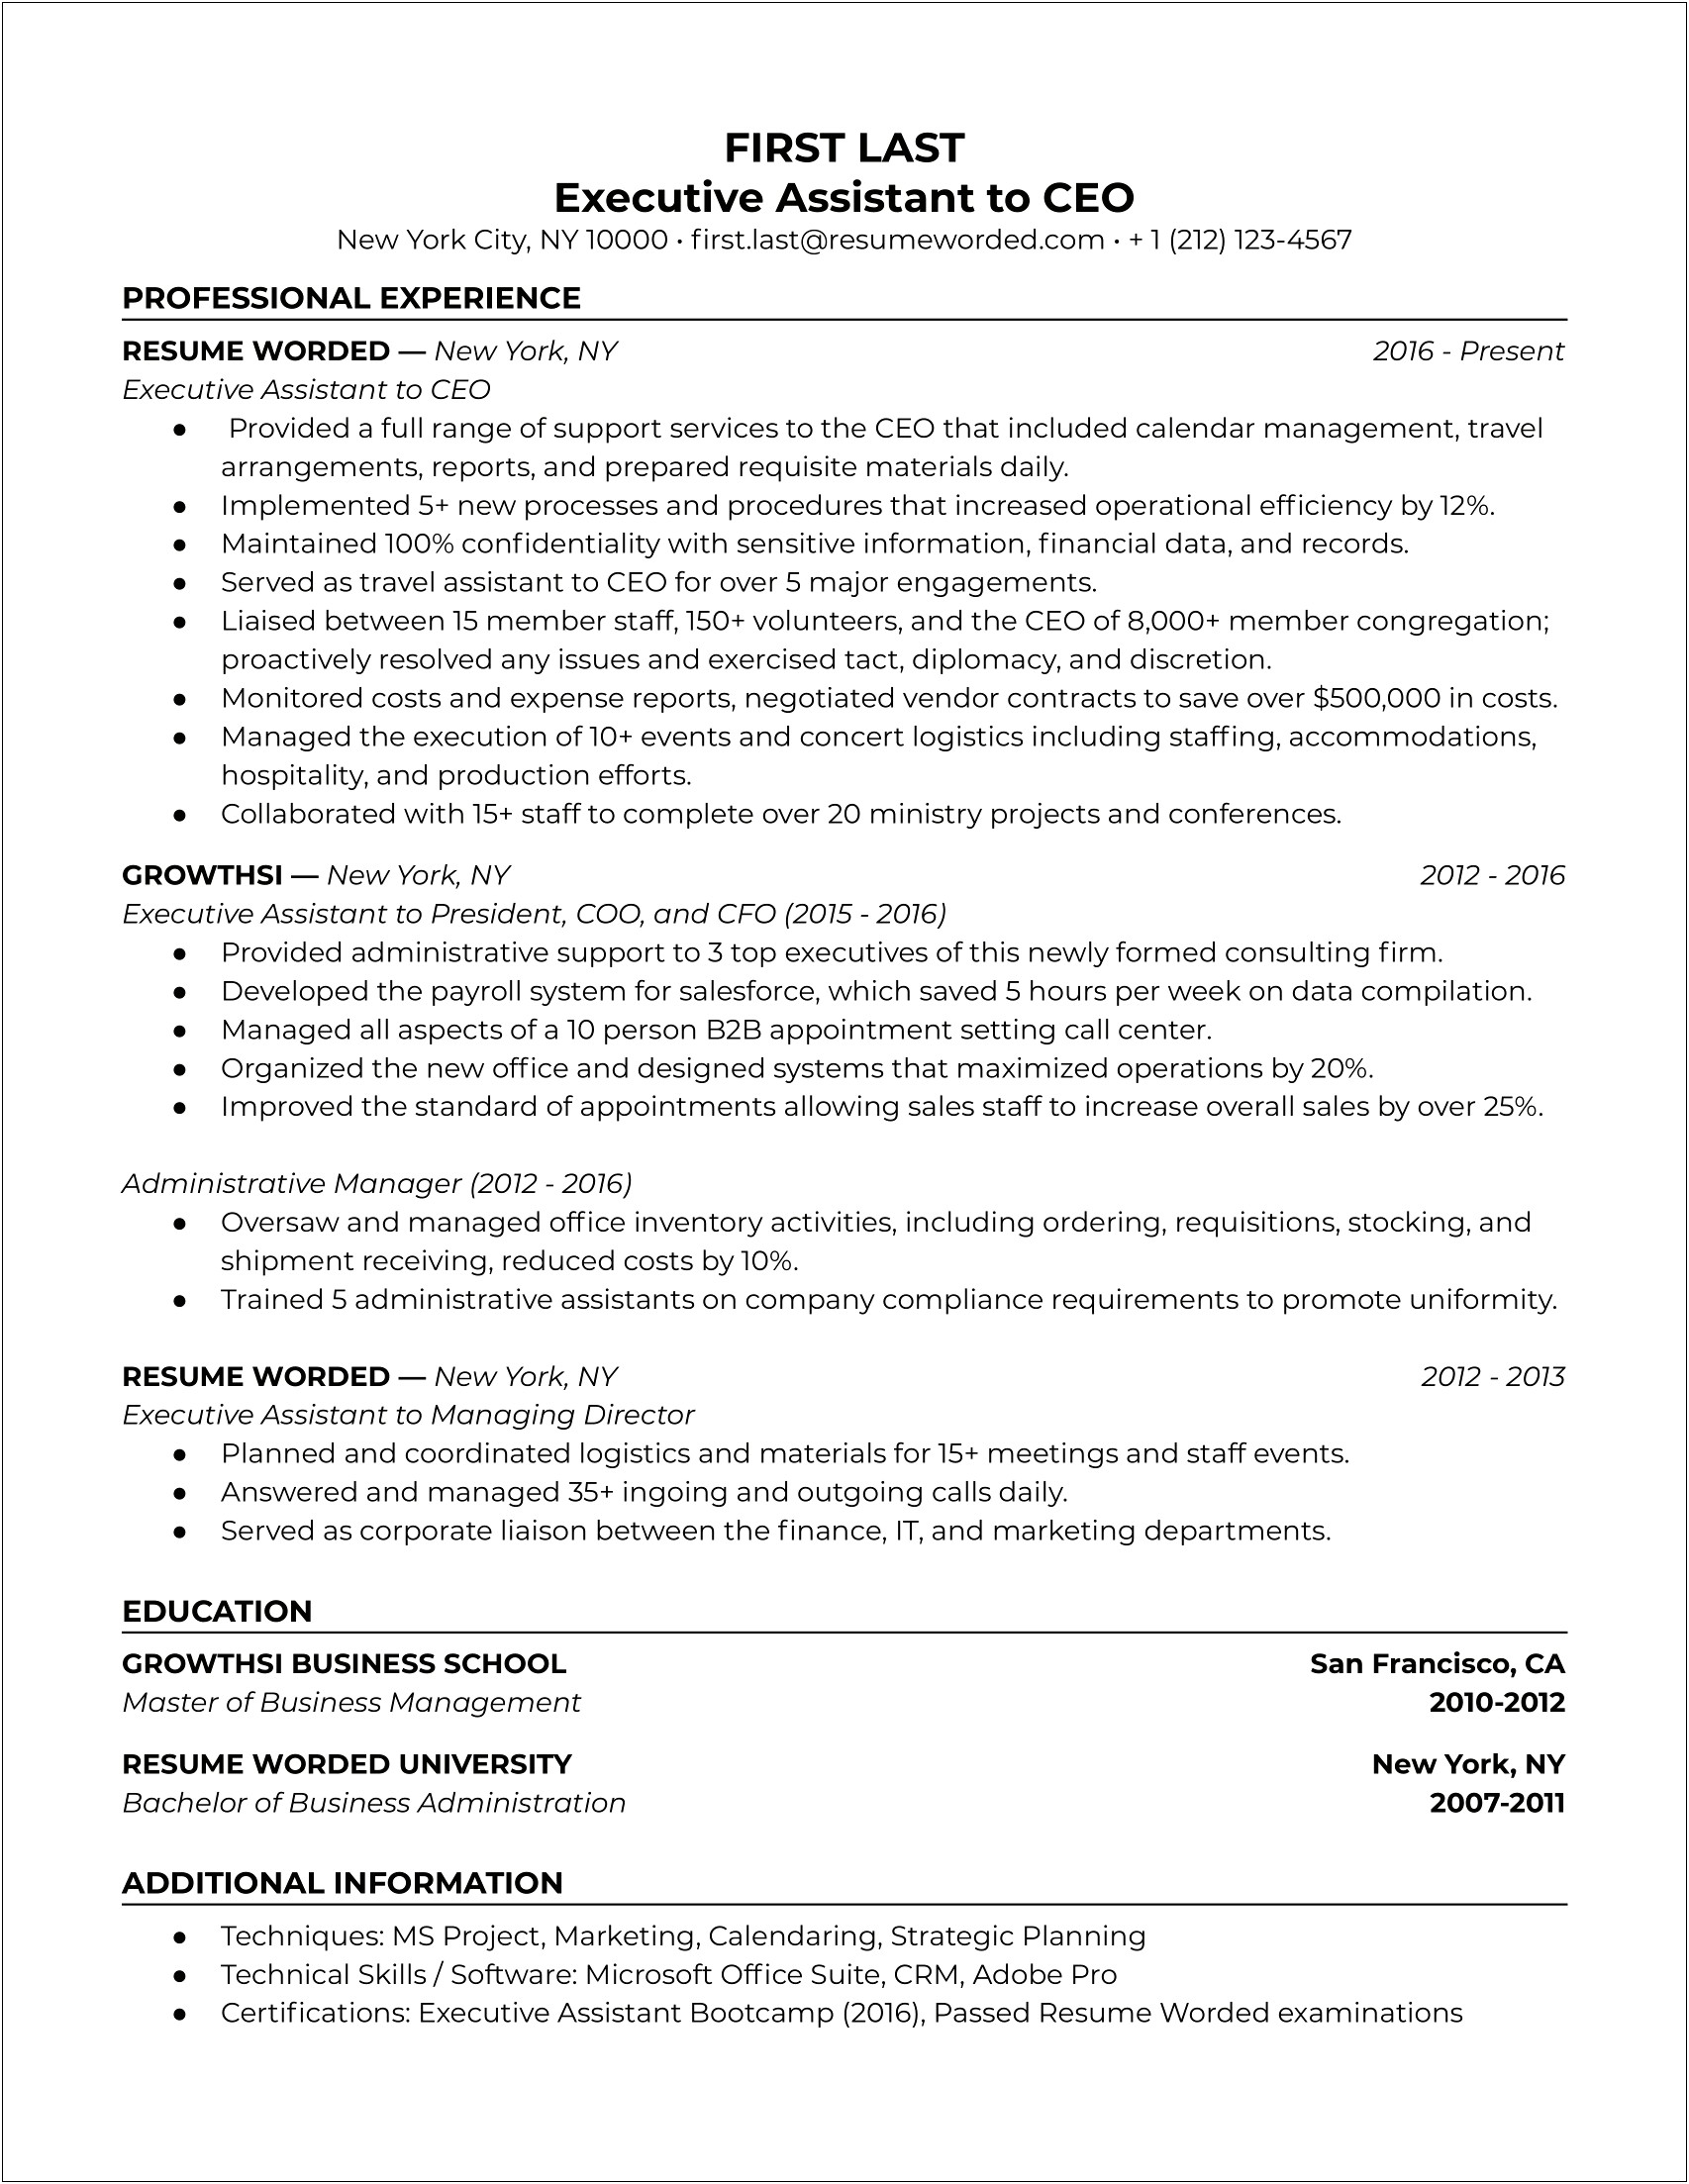 Professional Summary On Resume For Administrative Assistant